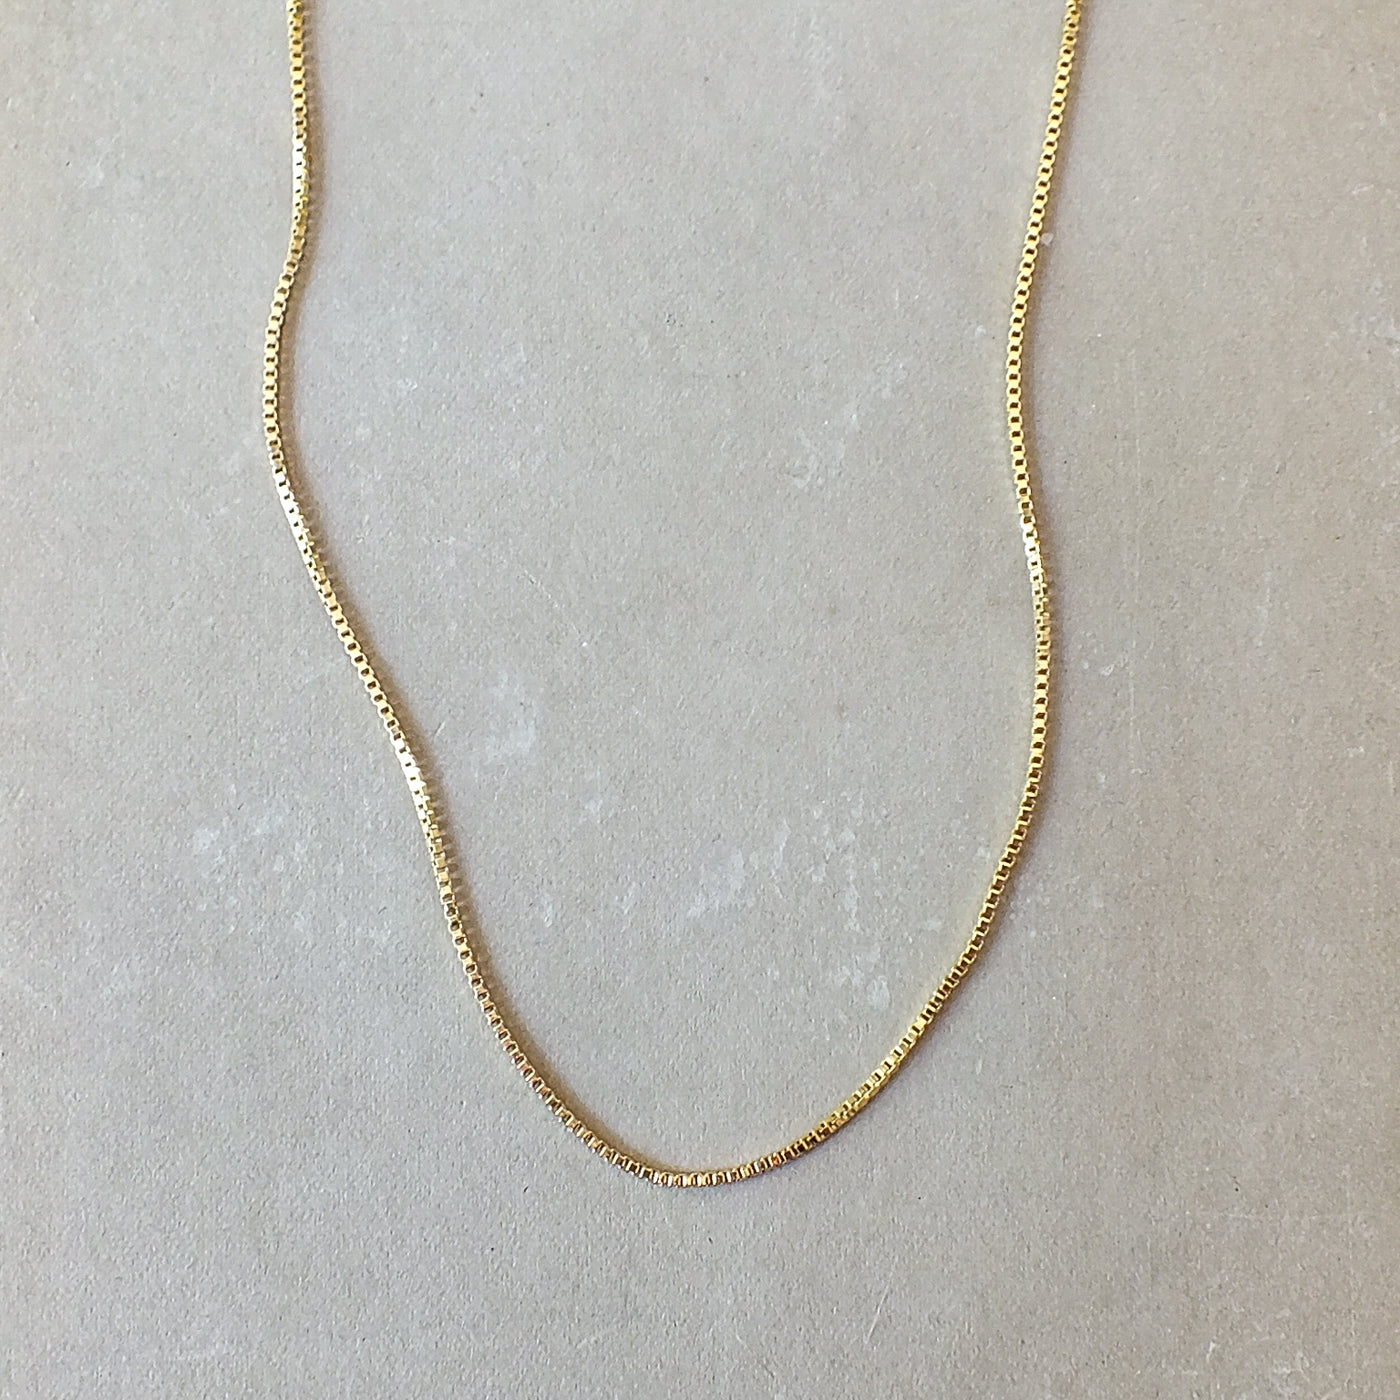 Becoming Jewelry&#39;s Gold filled box chain necklace on a plain background.